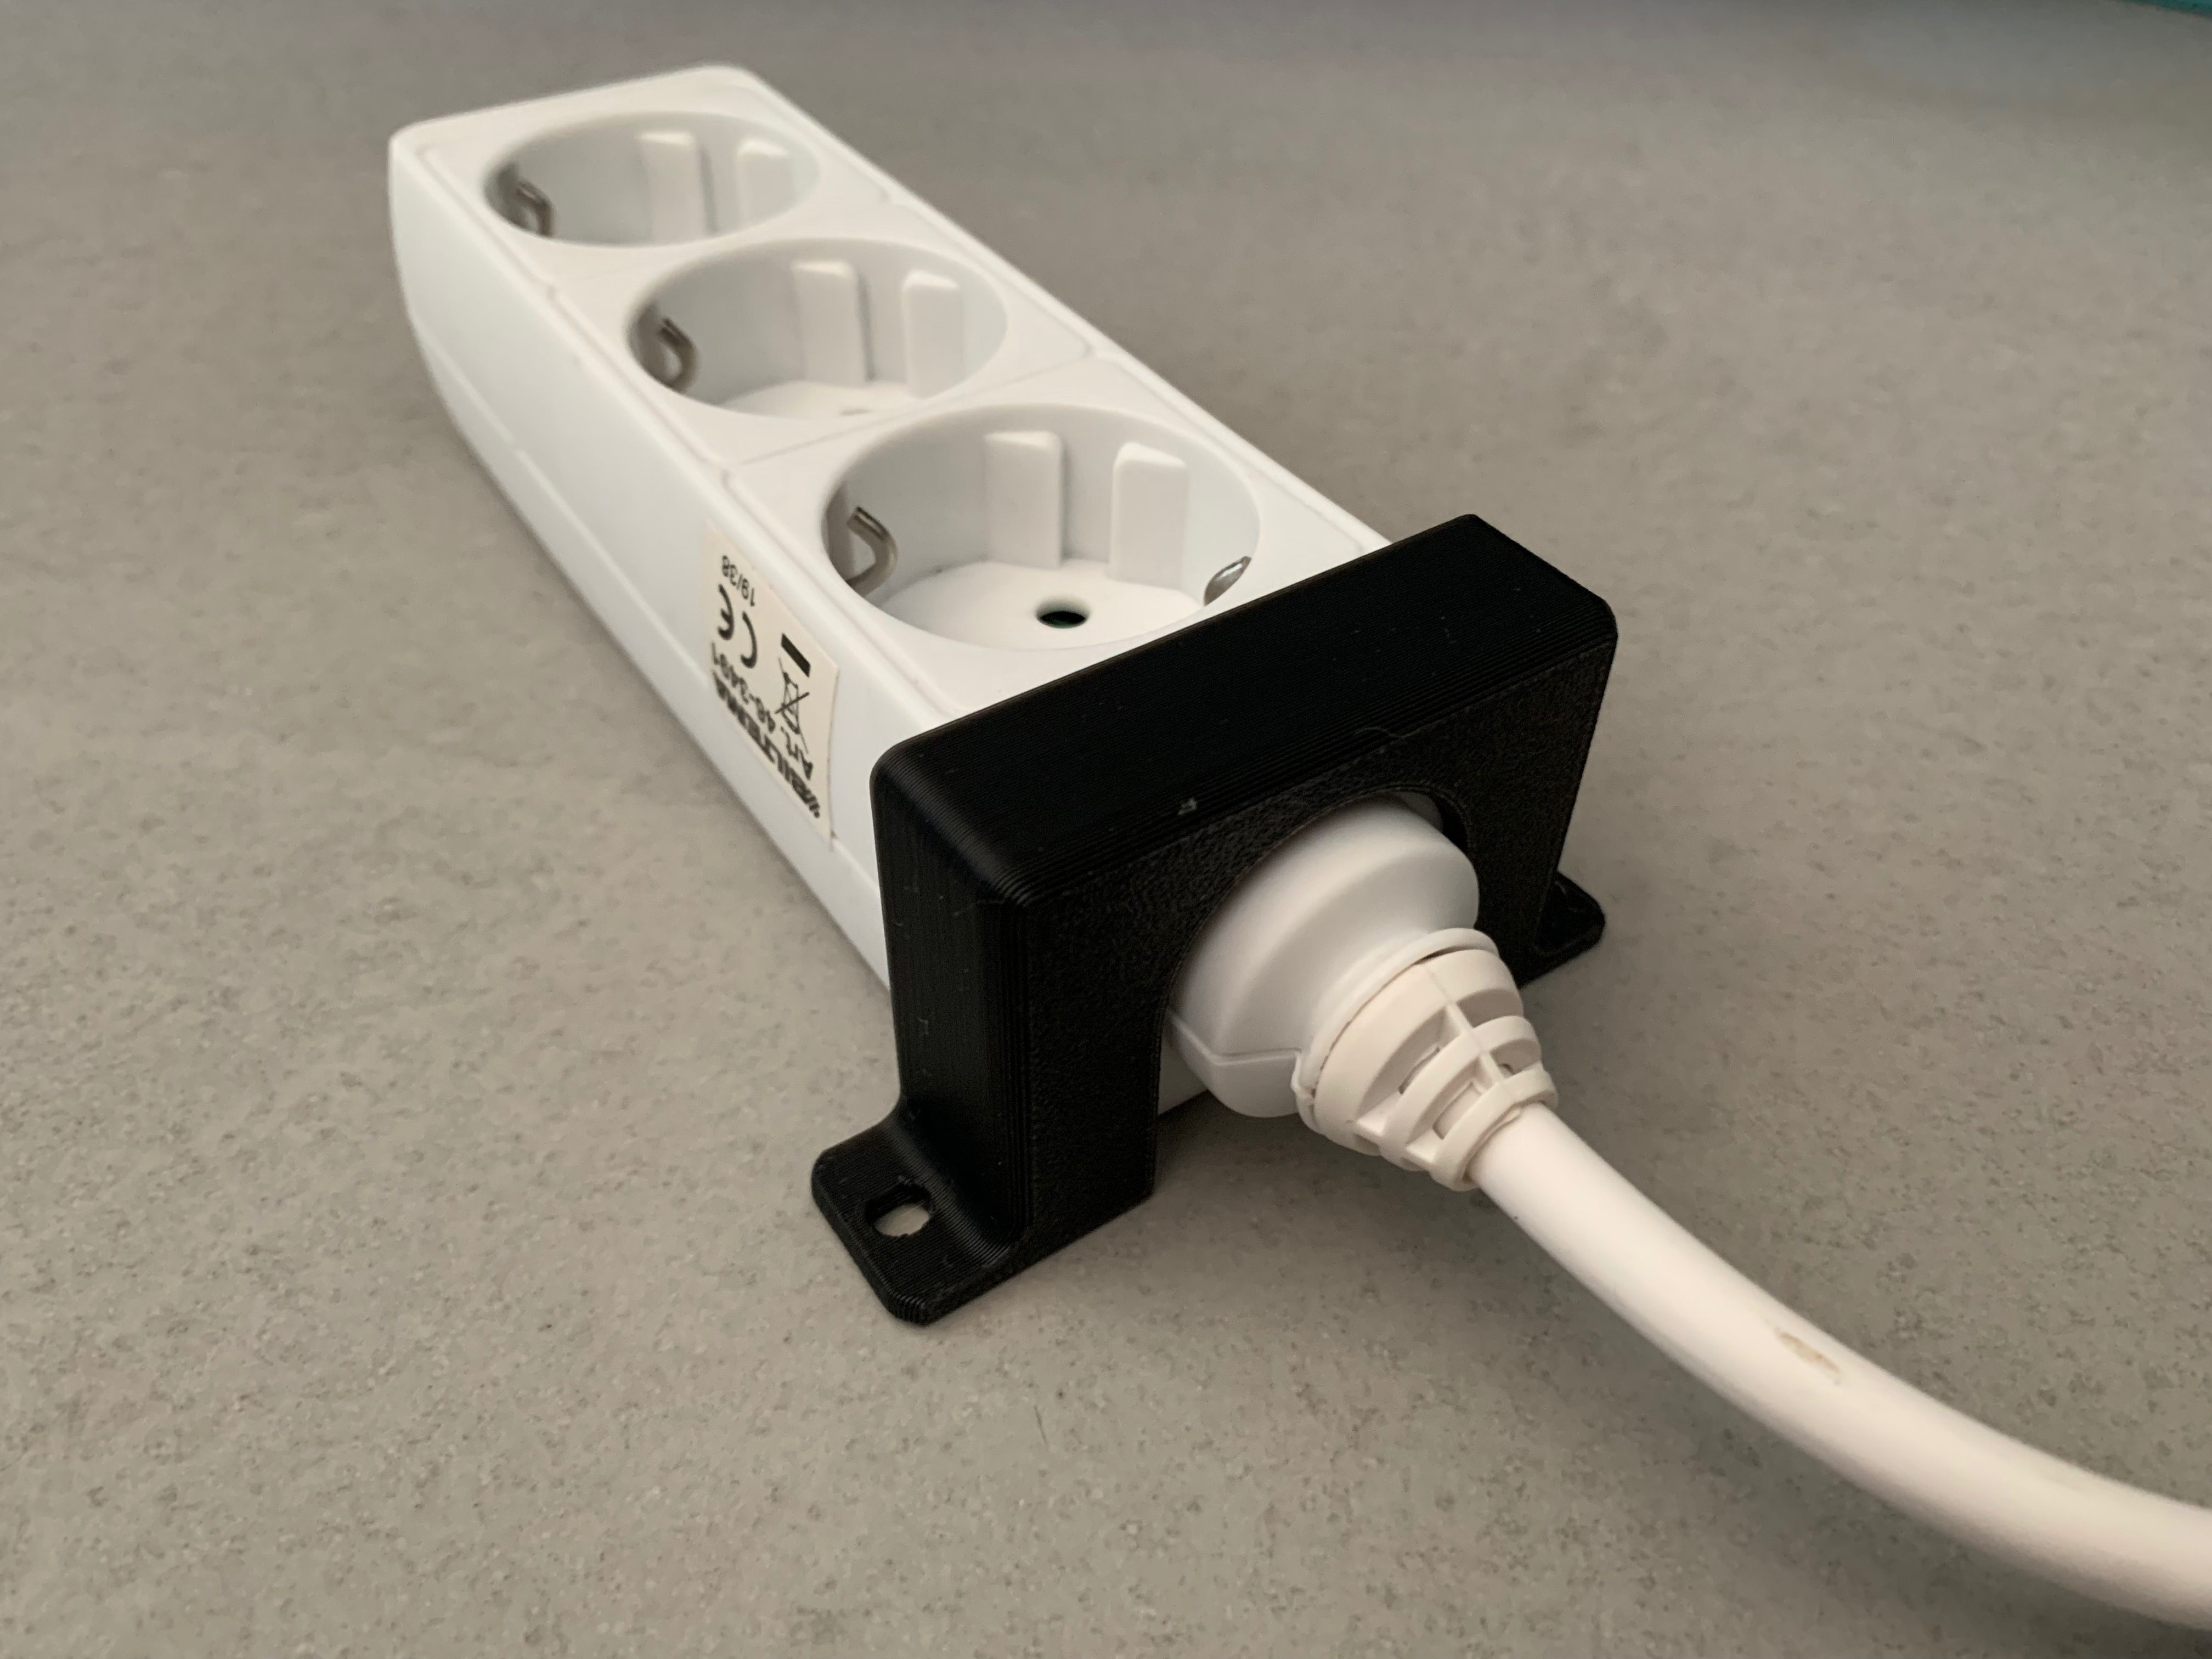 Power strip mount for wider power cords